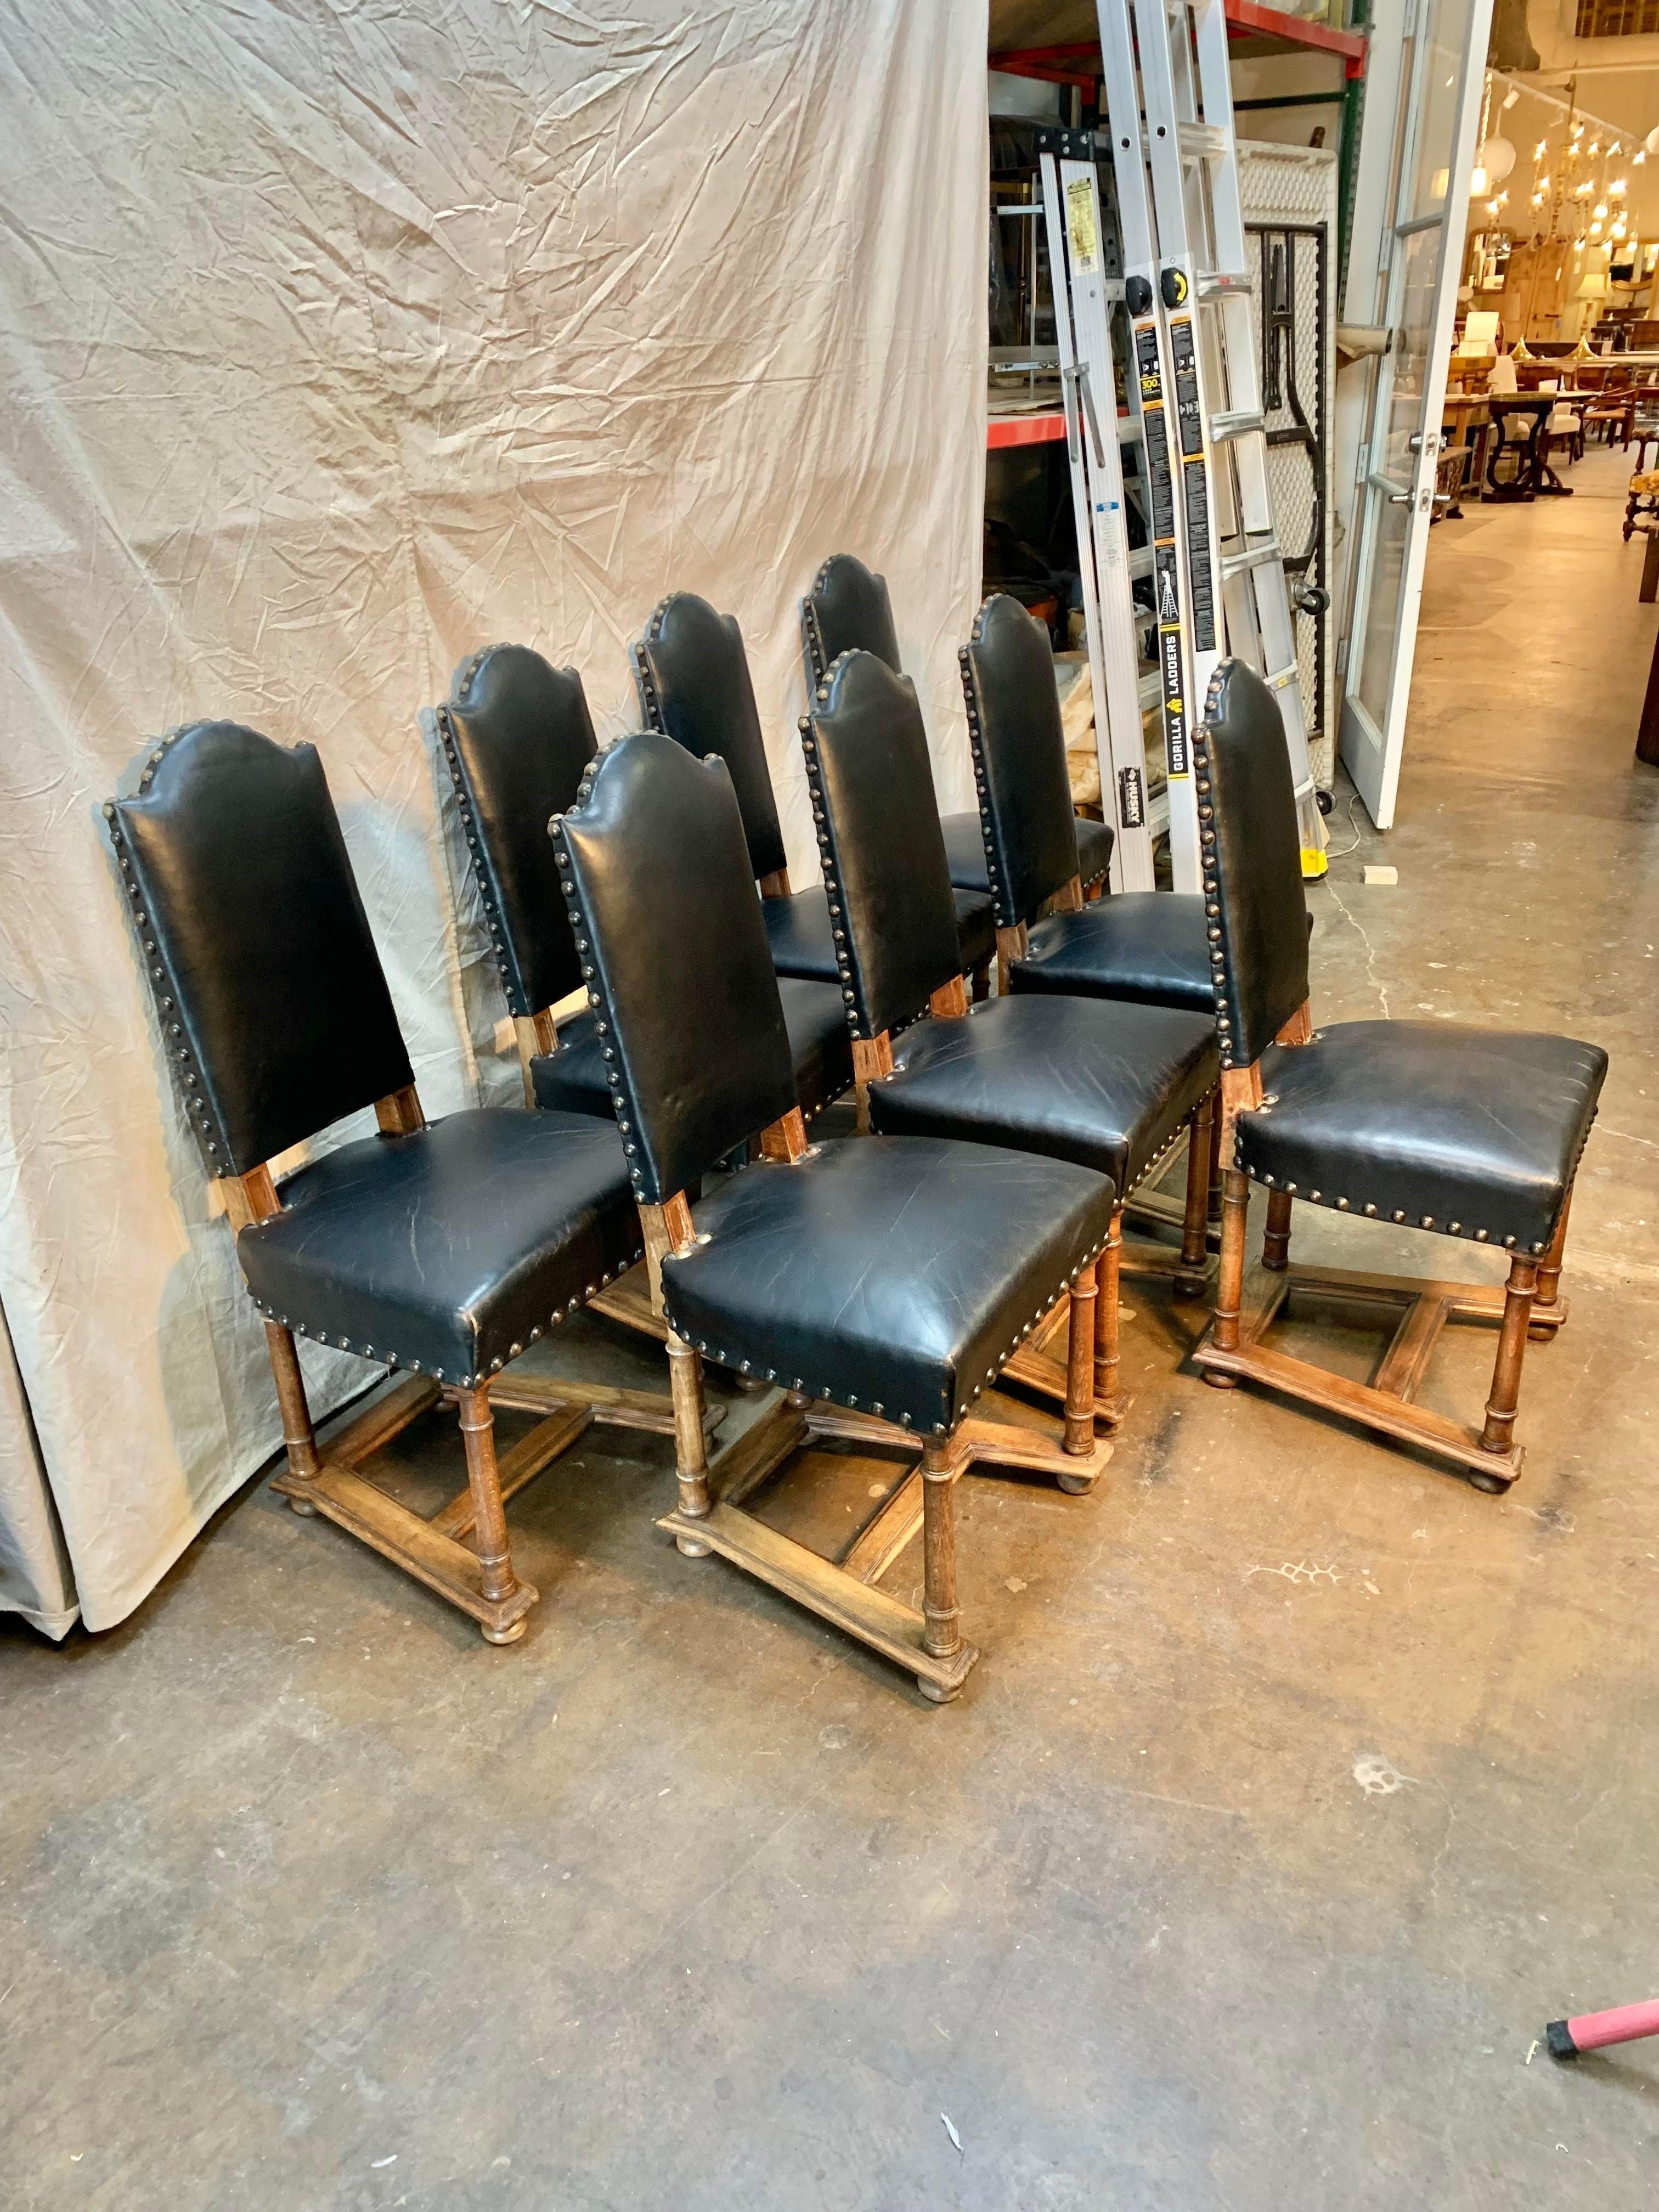 Found in France, this set of eight Early 19th Century French Dining Chairs feature the original leather upholstery and hand carved walnut. The chairs feature tall backs with nail heads. The trapezoidal shaped seats are supported by turned legs